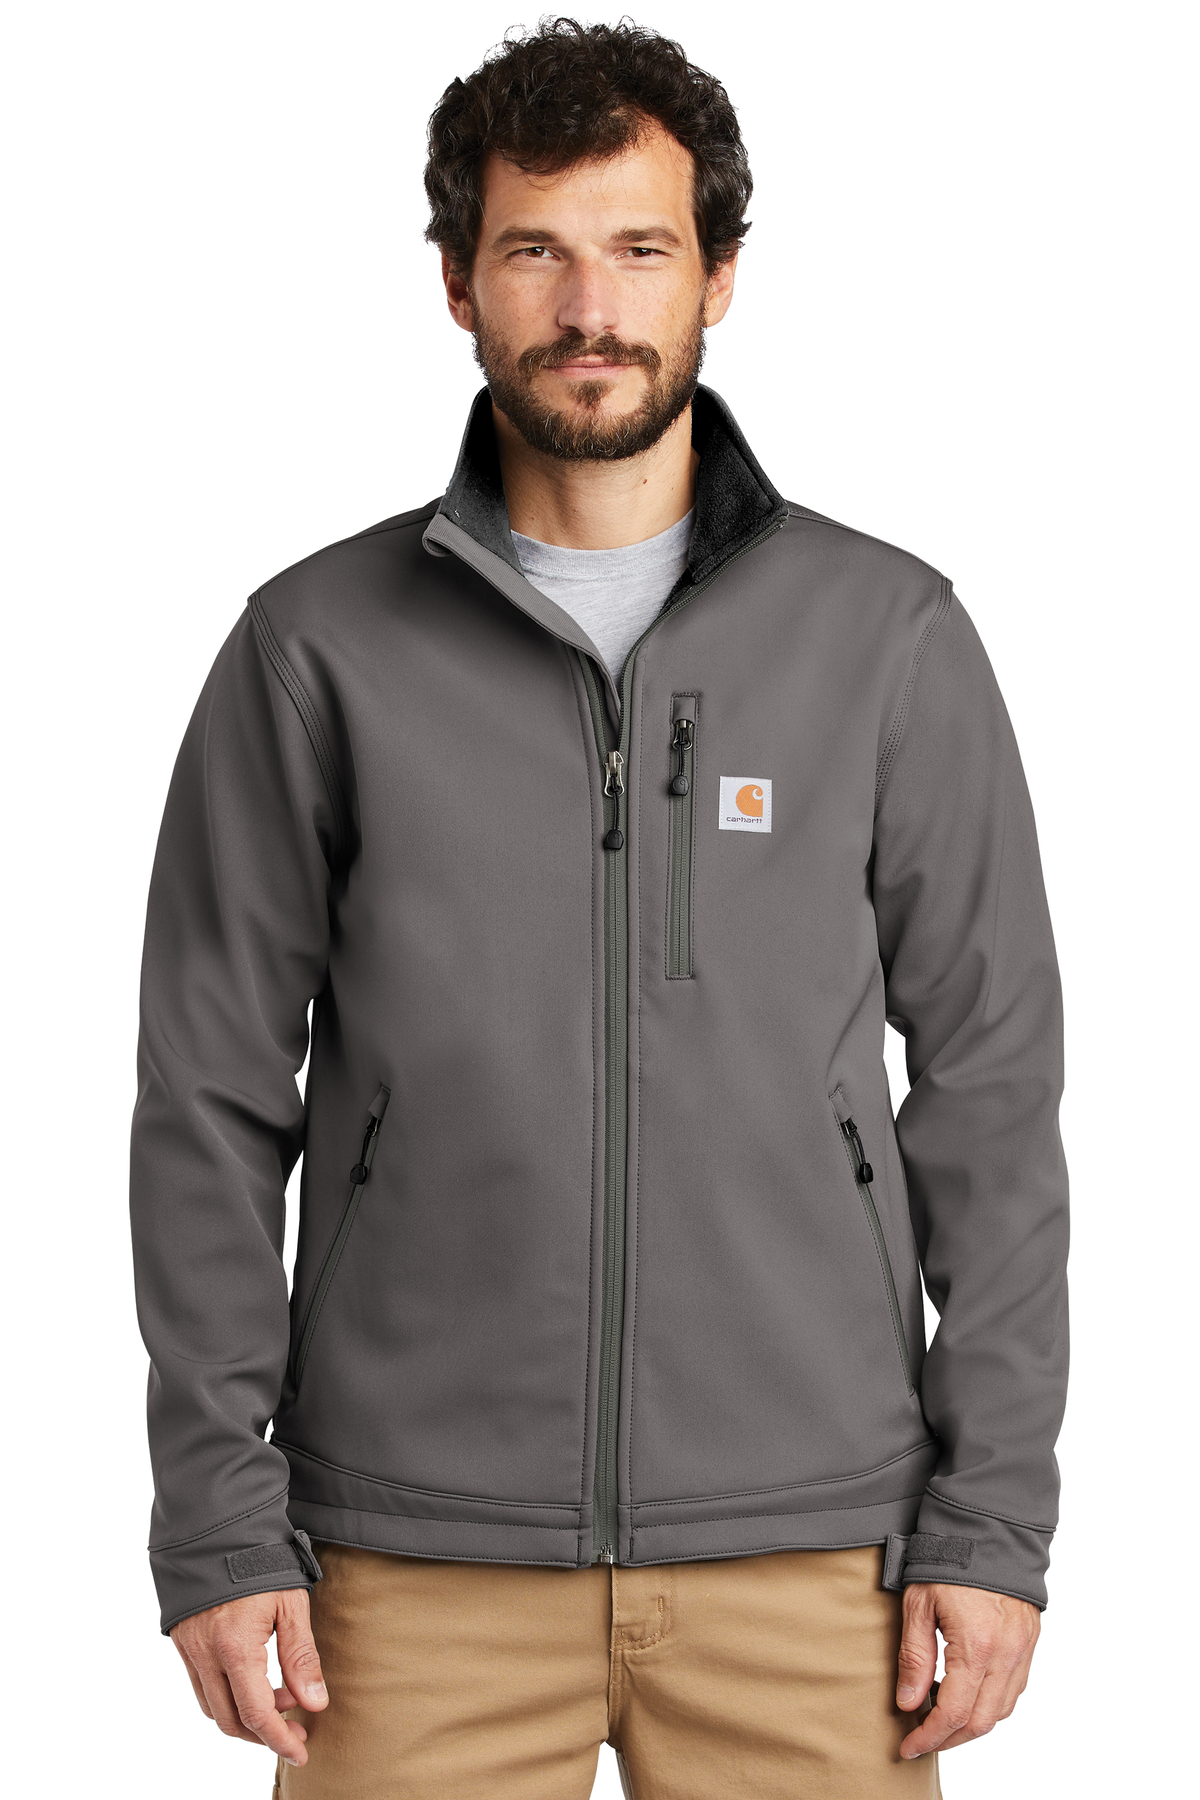 Carhartt Embroidered Men's Crowley Soft Shell Jacket - Queensboro